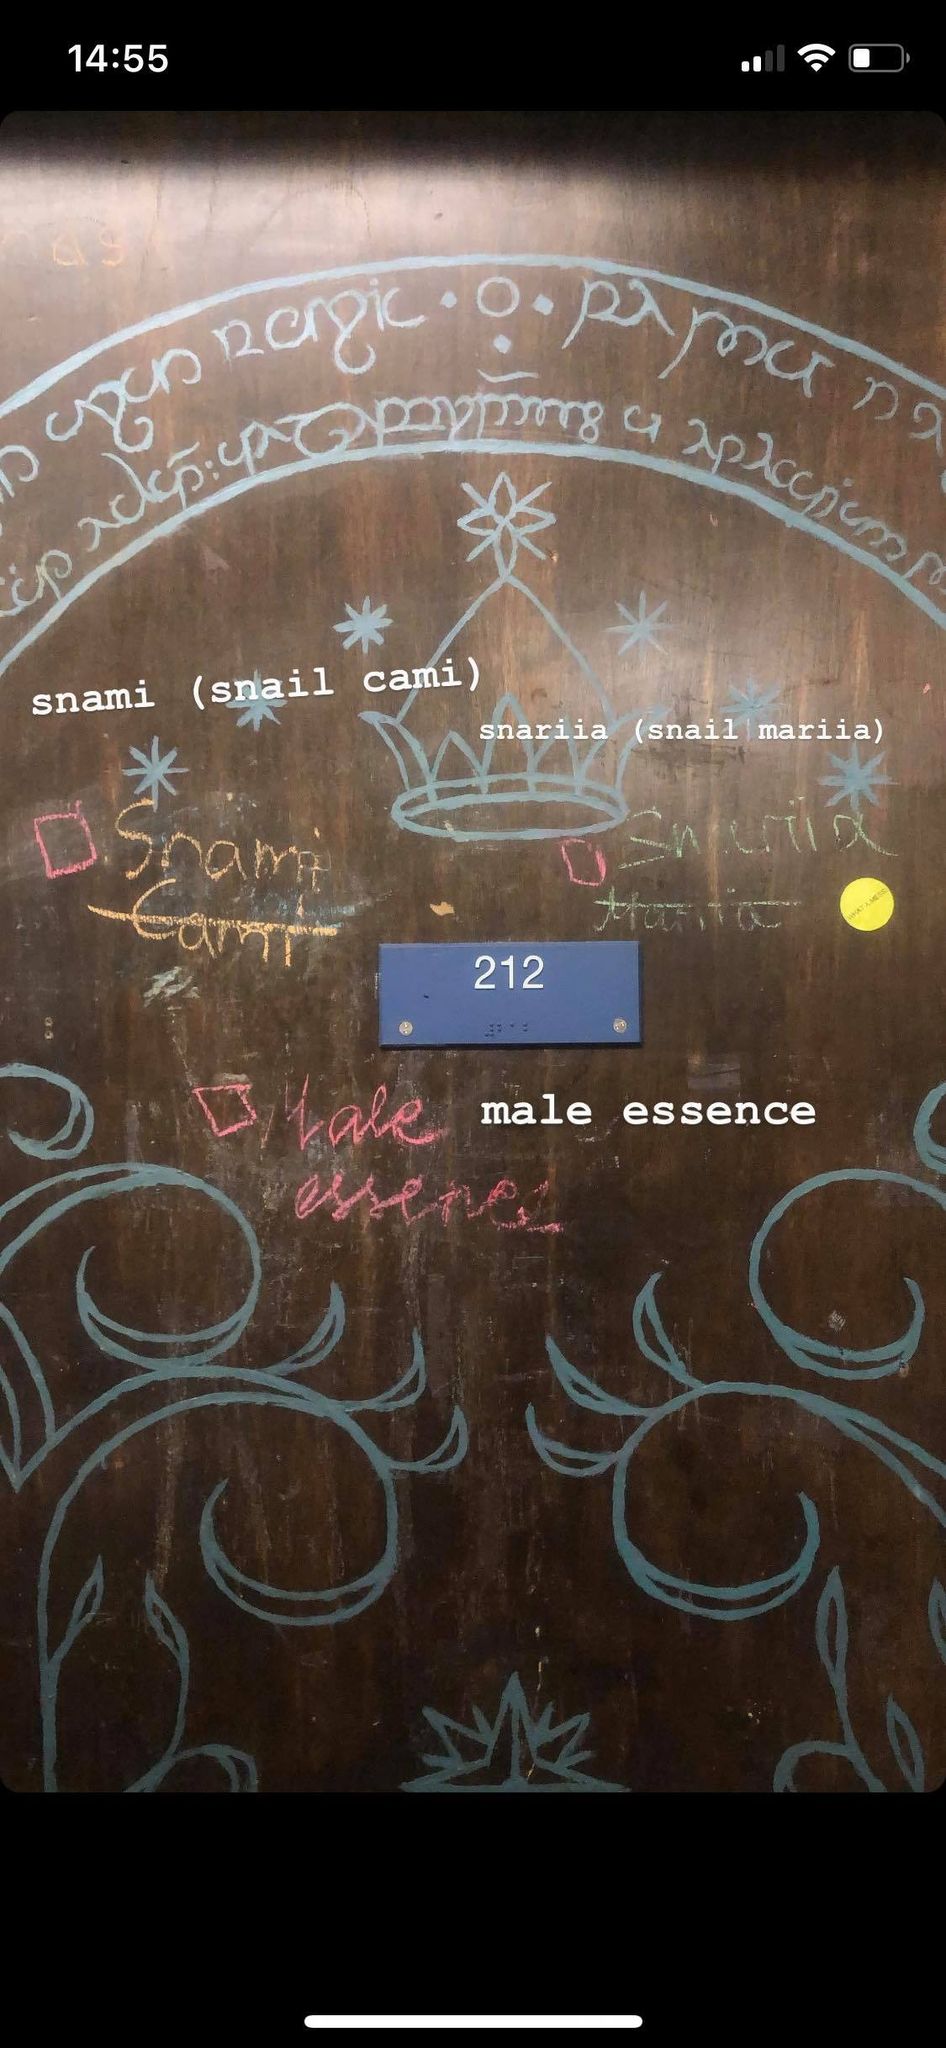 my old double door with snami, snariia, and male essence written on it in chalk